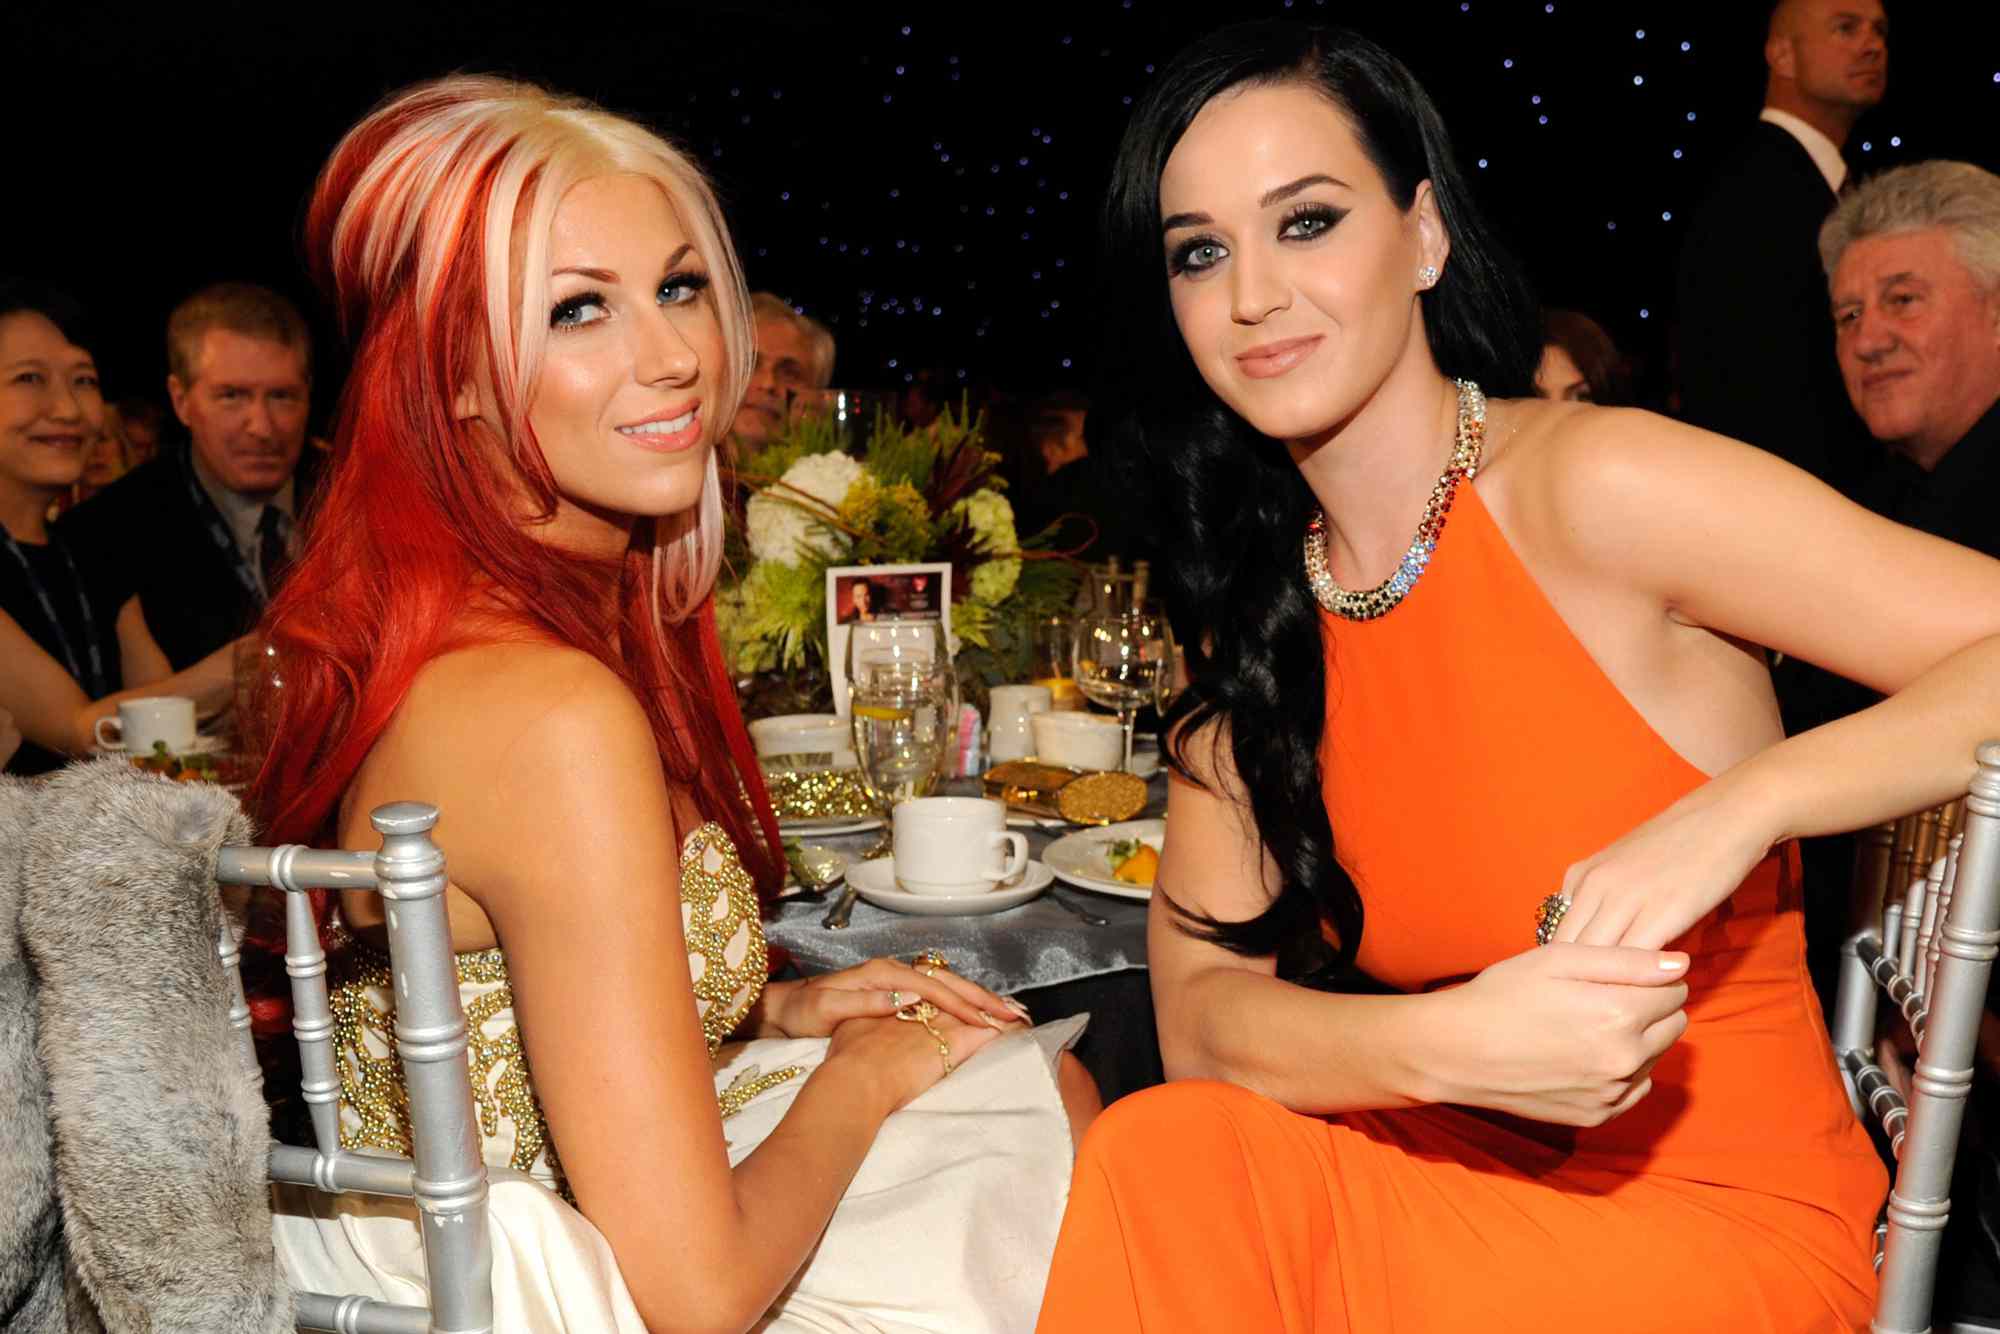 Bonnie McKee Reveals Which of the No. 1 Hits She Co-Wrote for Katy Perry Are Most Meaningful to Her (Exclusive)